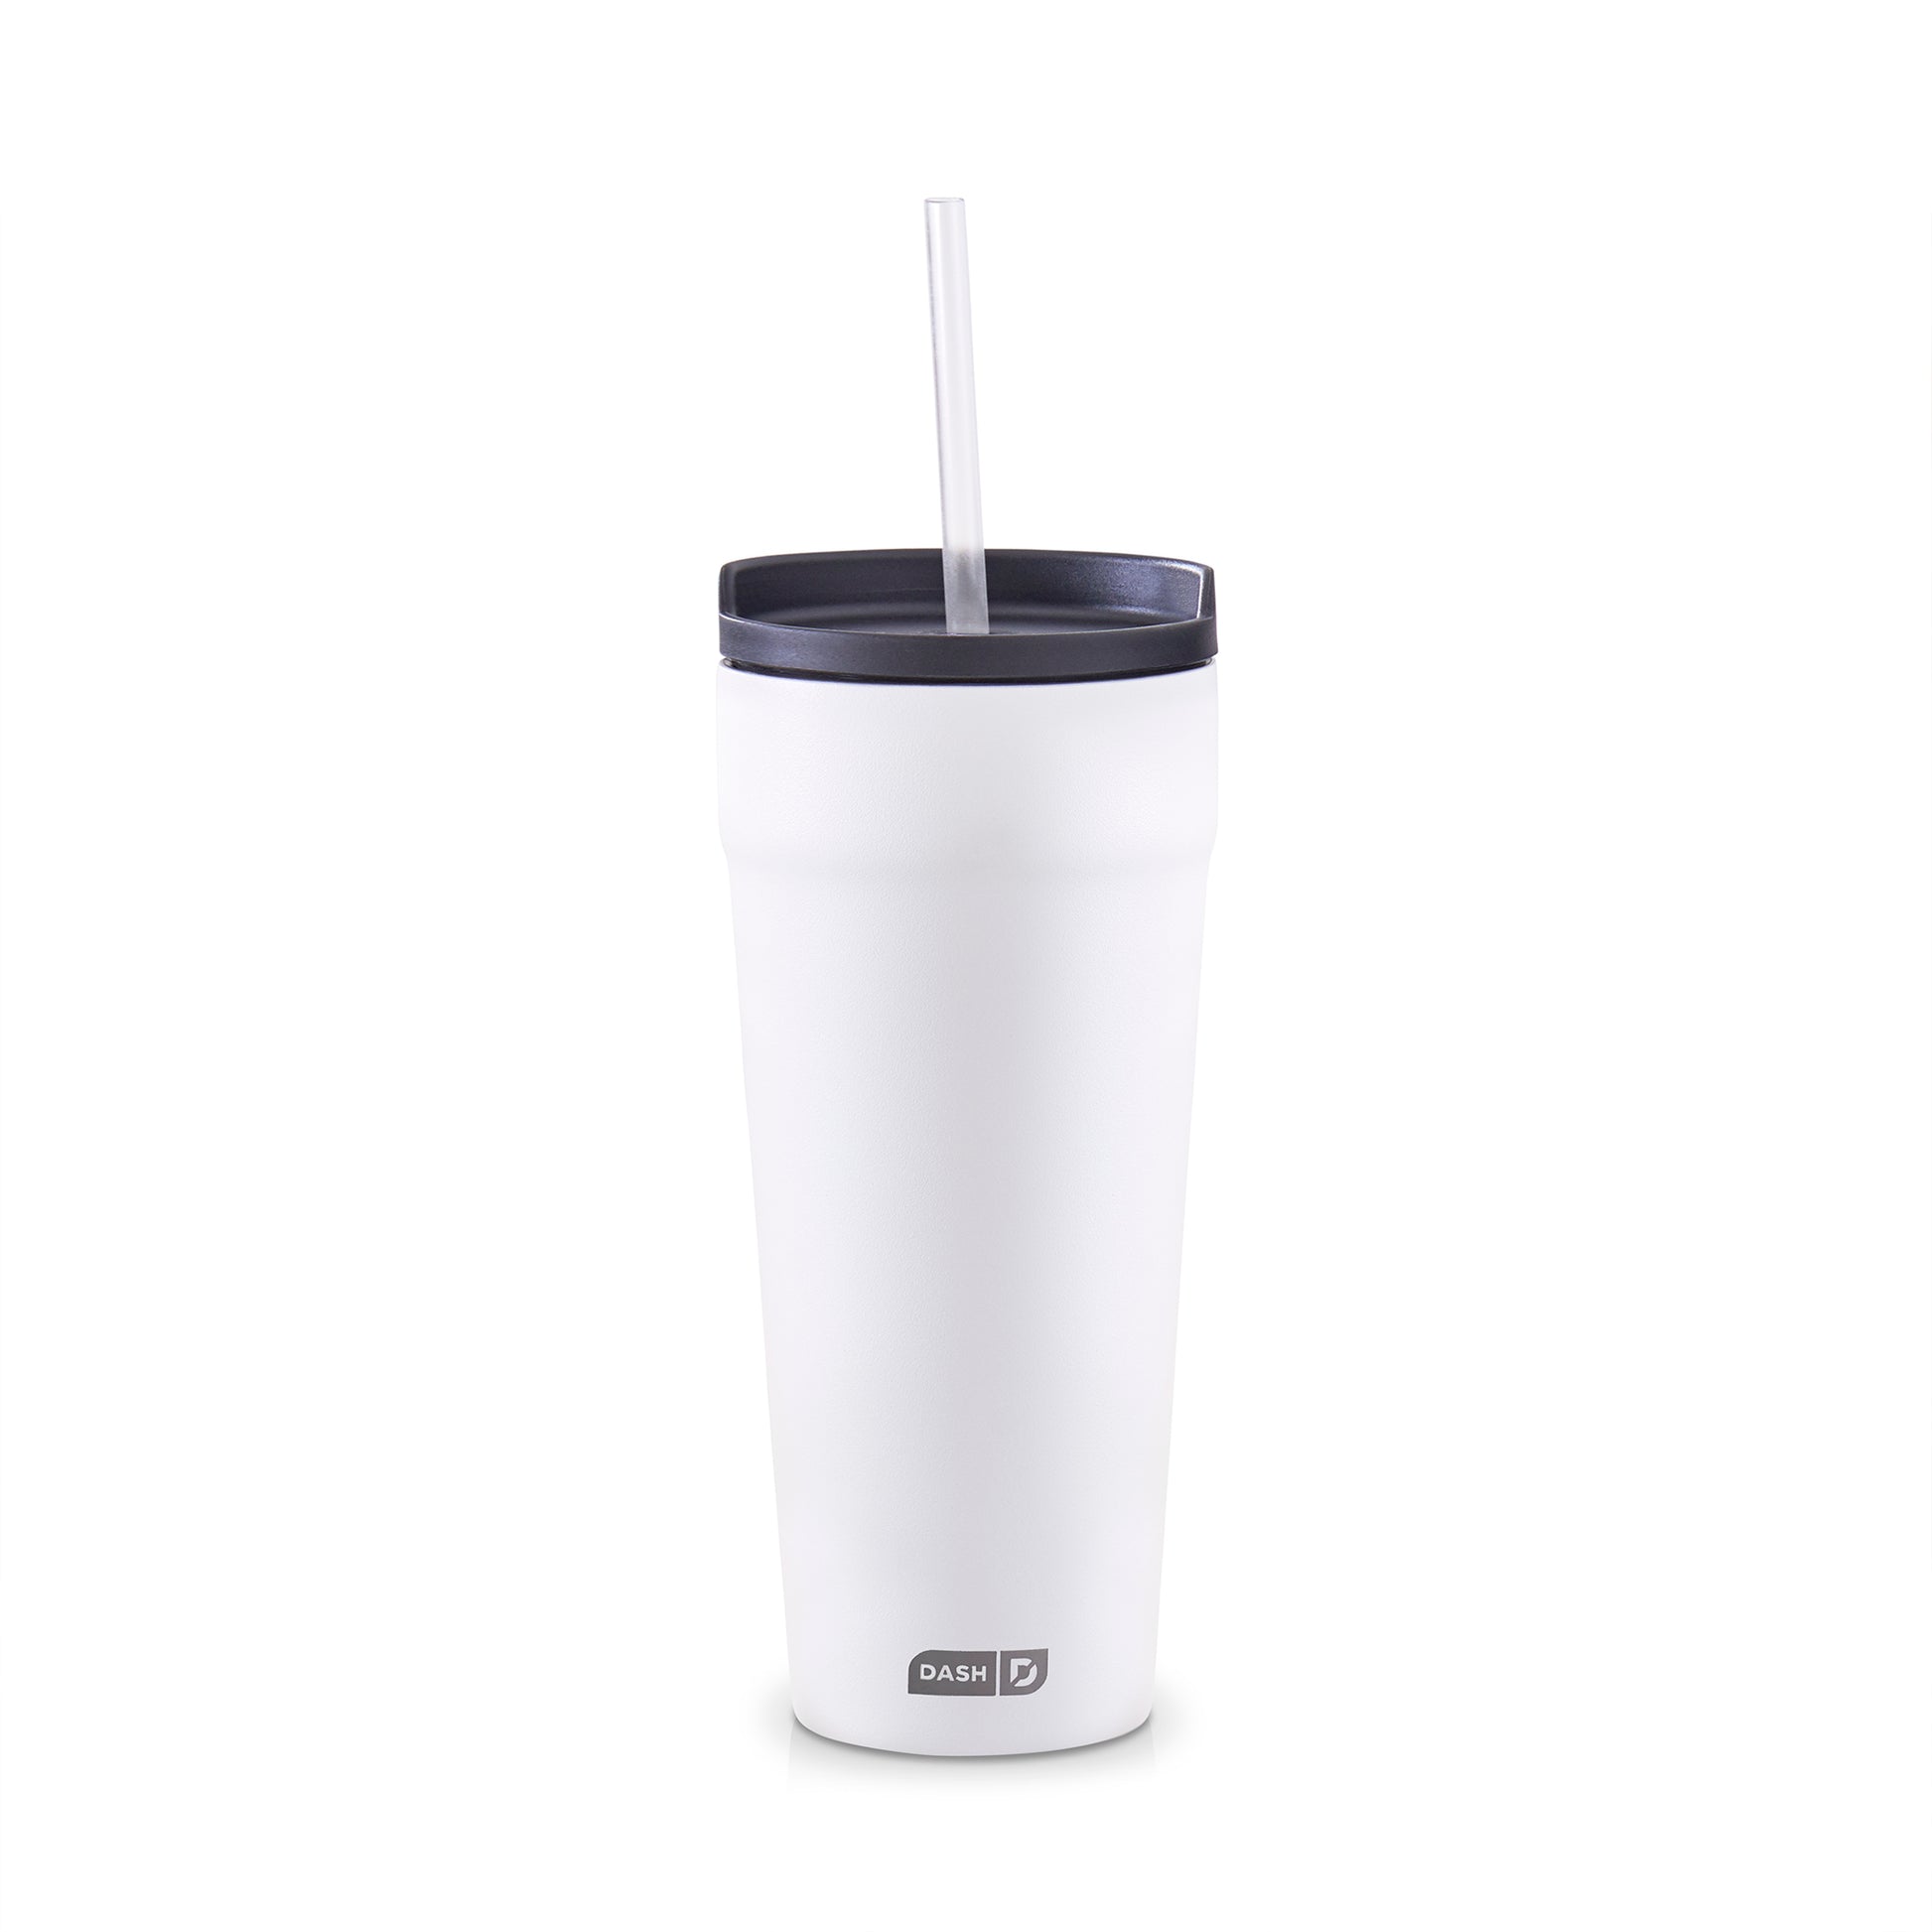 2-in-1 Spill-Proof Insulated Tumbler Tools and Gadgets Dash White  